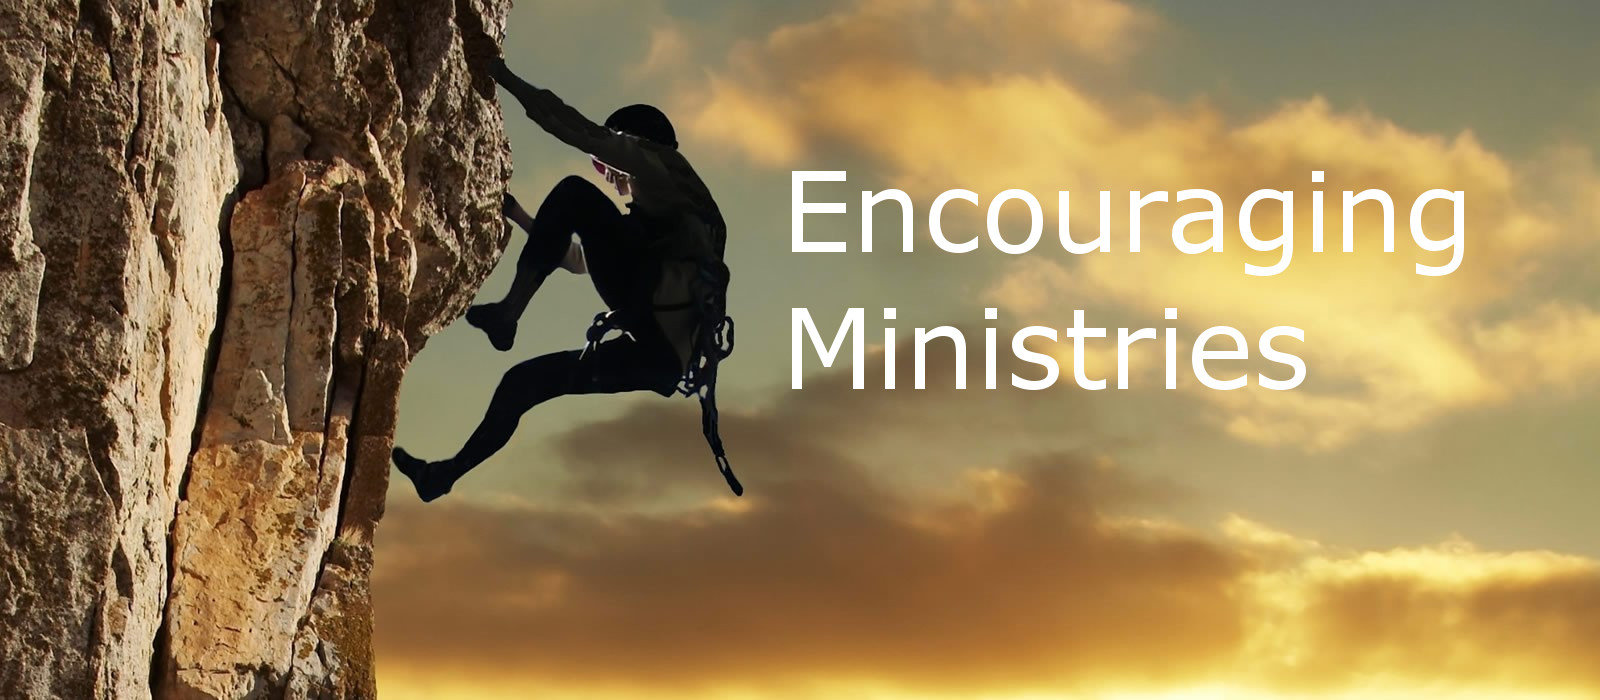 Encouraging Ministries